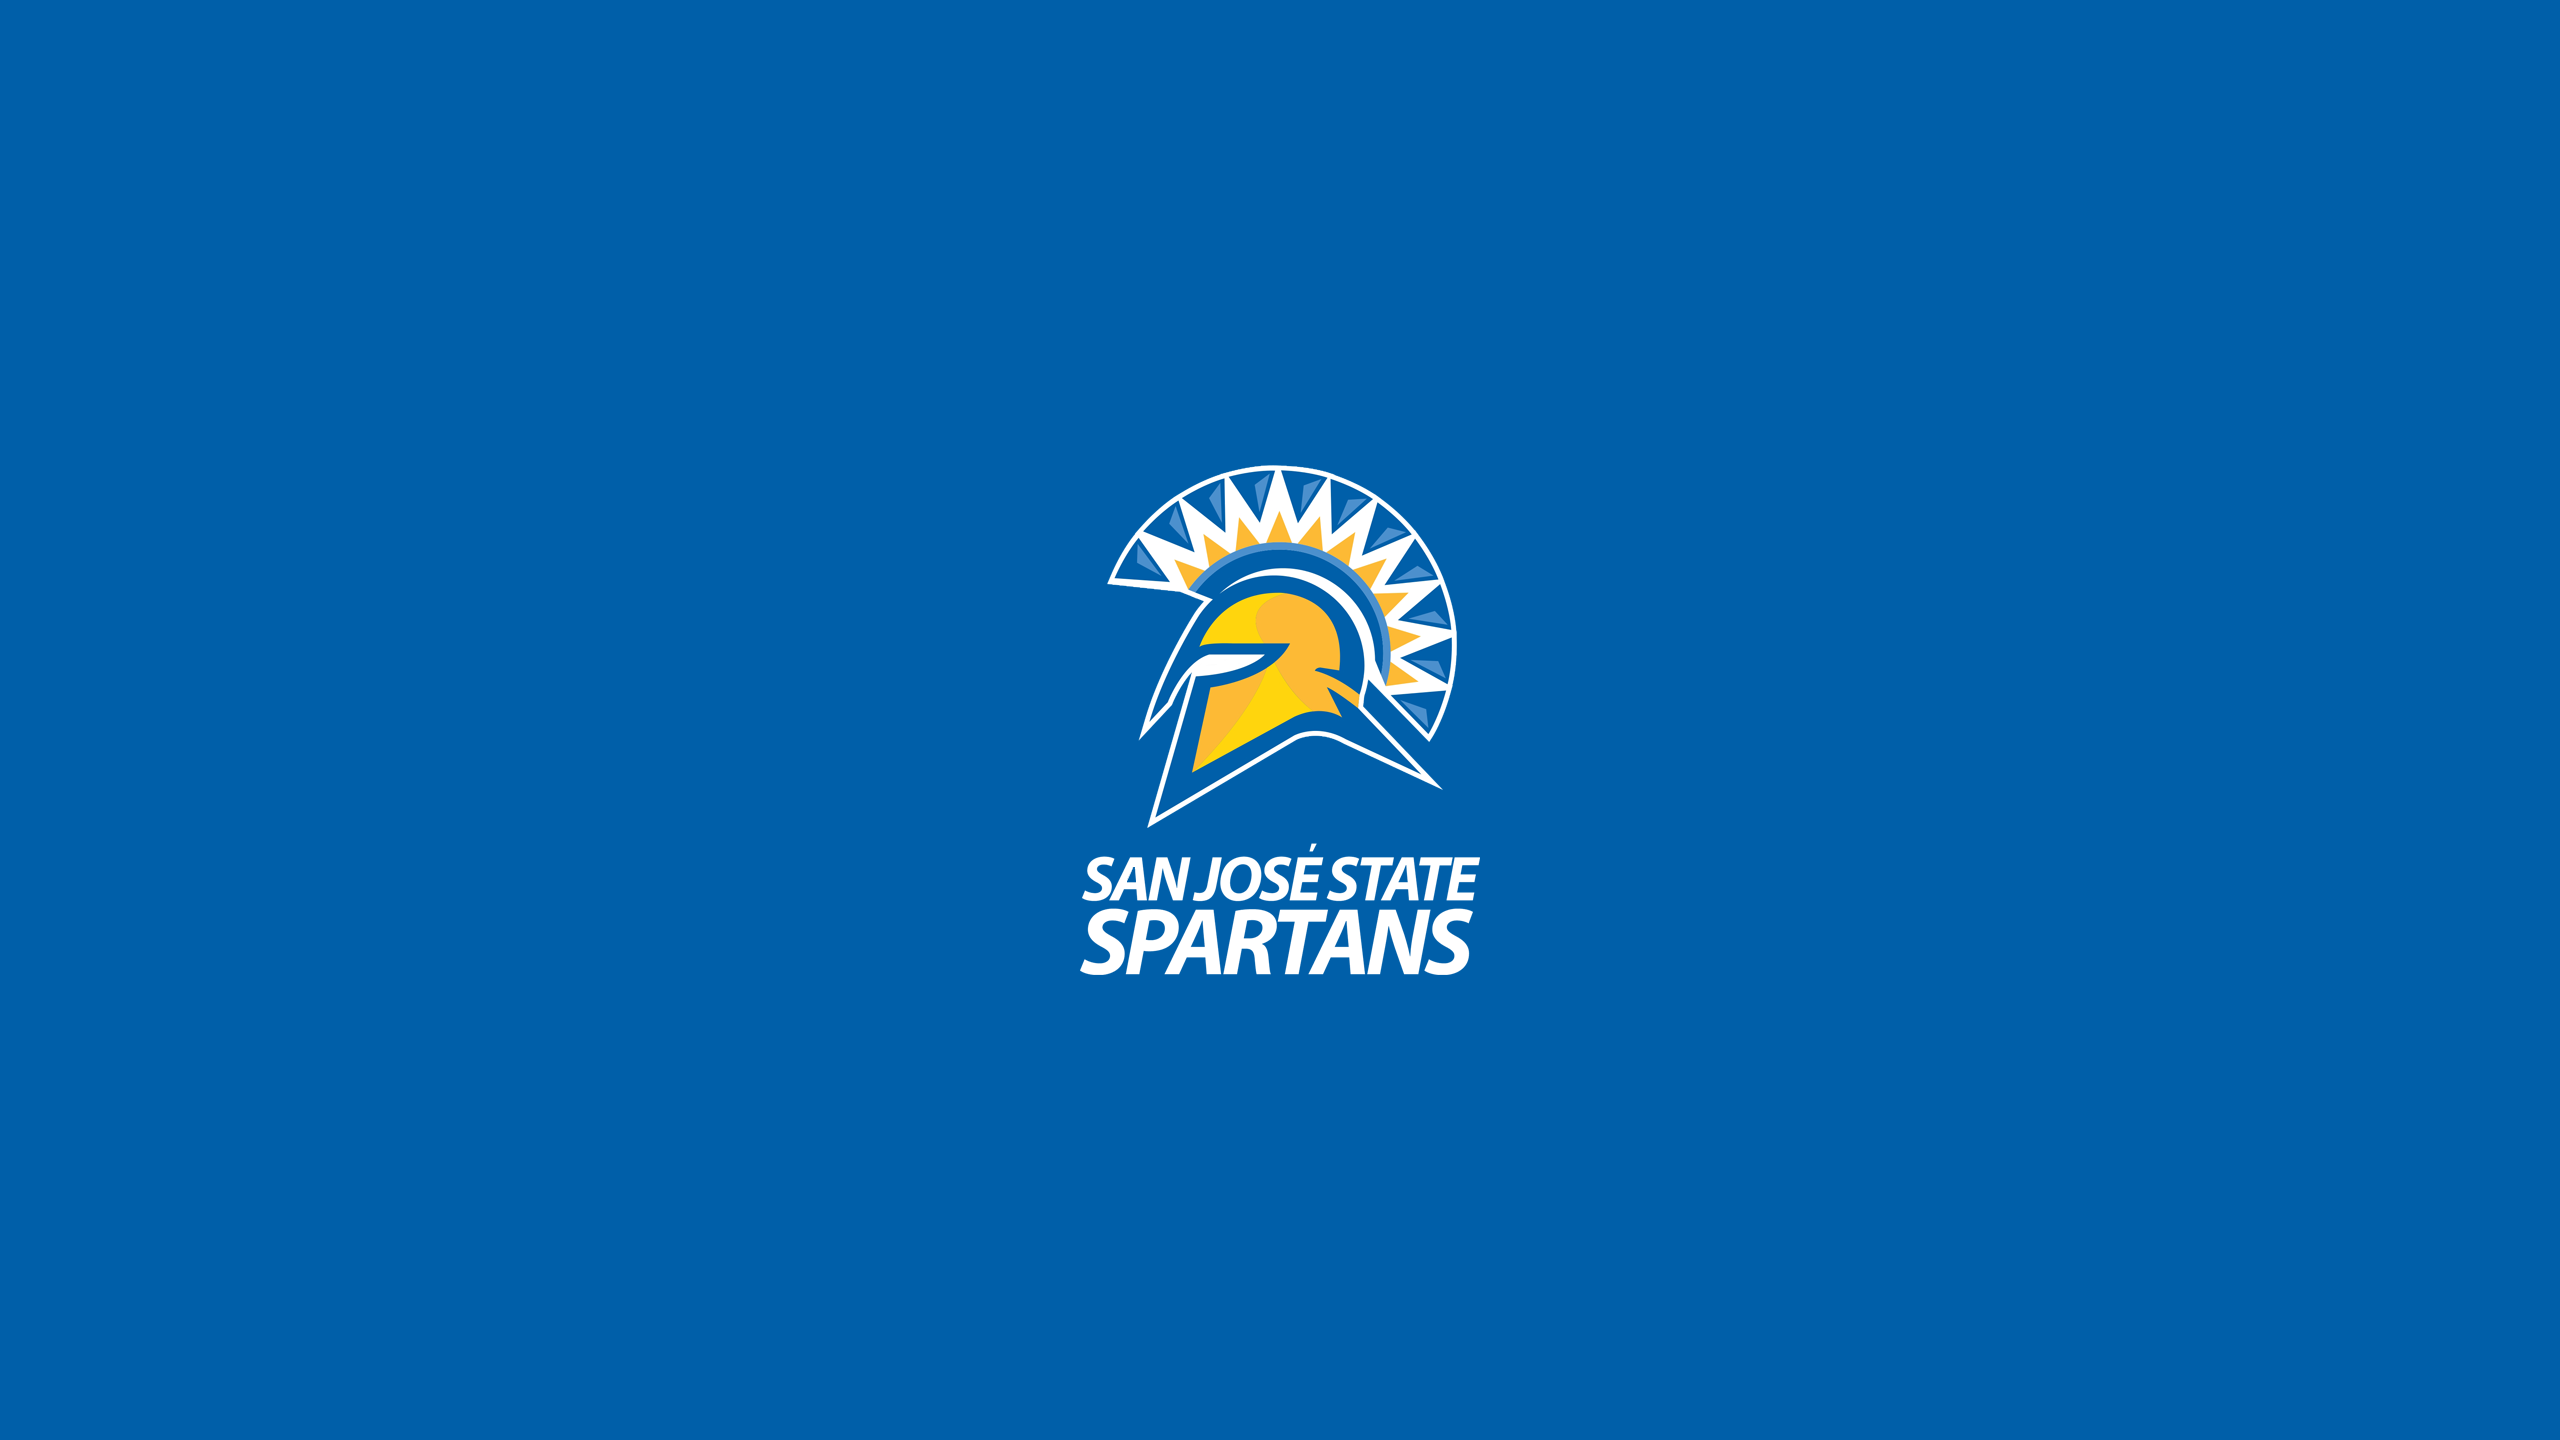 San Jose State Spartans Football - NCAAF - Square Bettor